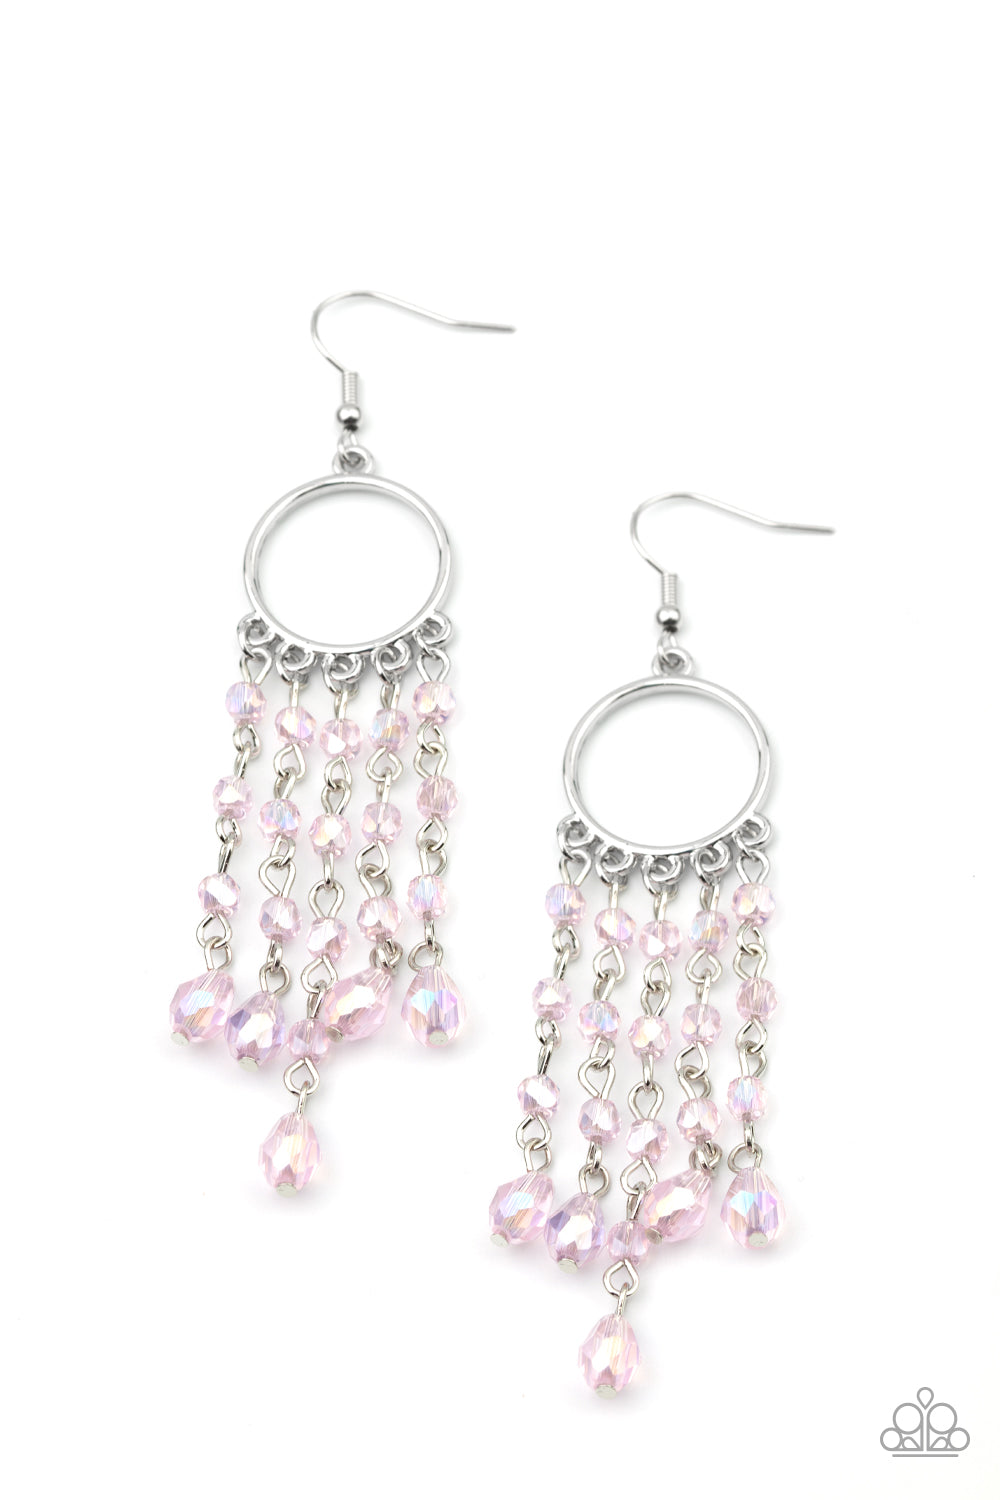 &lt;P&gt;Glittery rows of iridescently pink crystal-like beads stream from the bottom of a dainty silver hoop, creating a dazzling chandelier. Earring attaches to a standard fishhook fitting.&lt;/P&gt;  

&lt;P&gt; &lt;I&gt;  Sold as one pair of earrings. &lt;/I&gt;  &lt;/P&gt;


&lt;img src=\&quot;https://d9b54x484lq62.cloudfront.net/paparazzi/shopping/images/517_tag150x115_1.png\&quot; alt=\&quot;New Kit\&quot; align=\&quot;middle\&quot; height=\&quot;50\&quot; width=\&quot;50\&quot;/&gt;